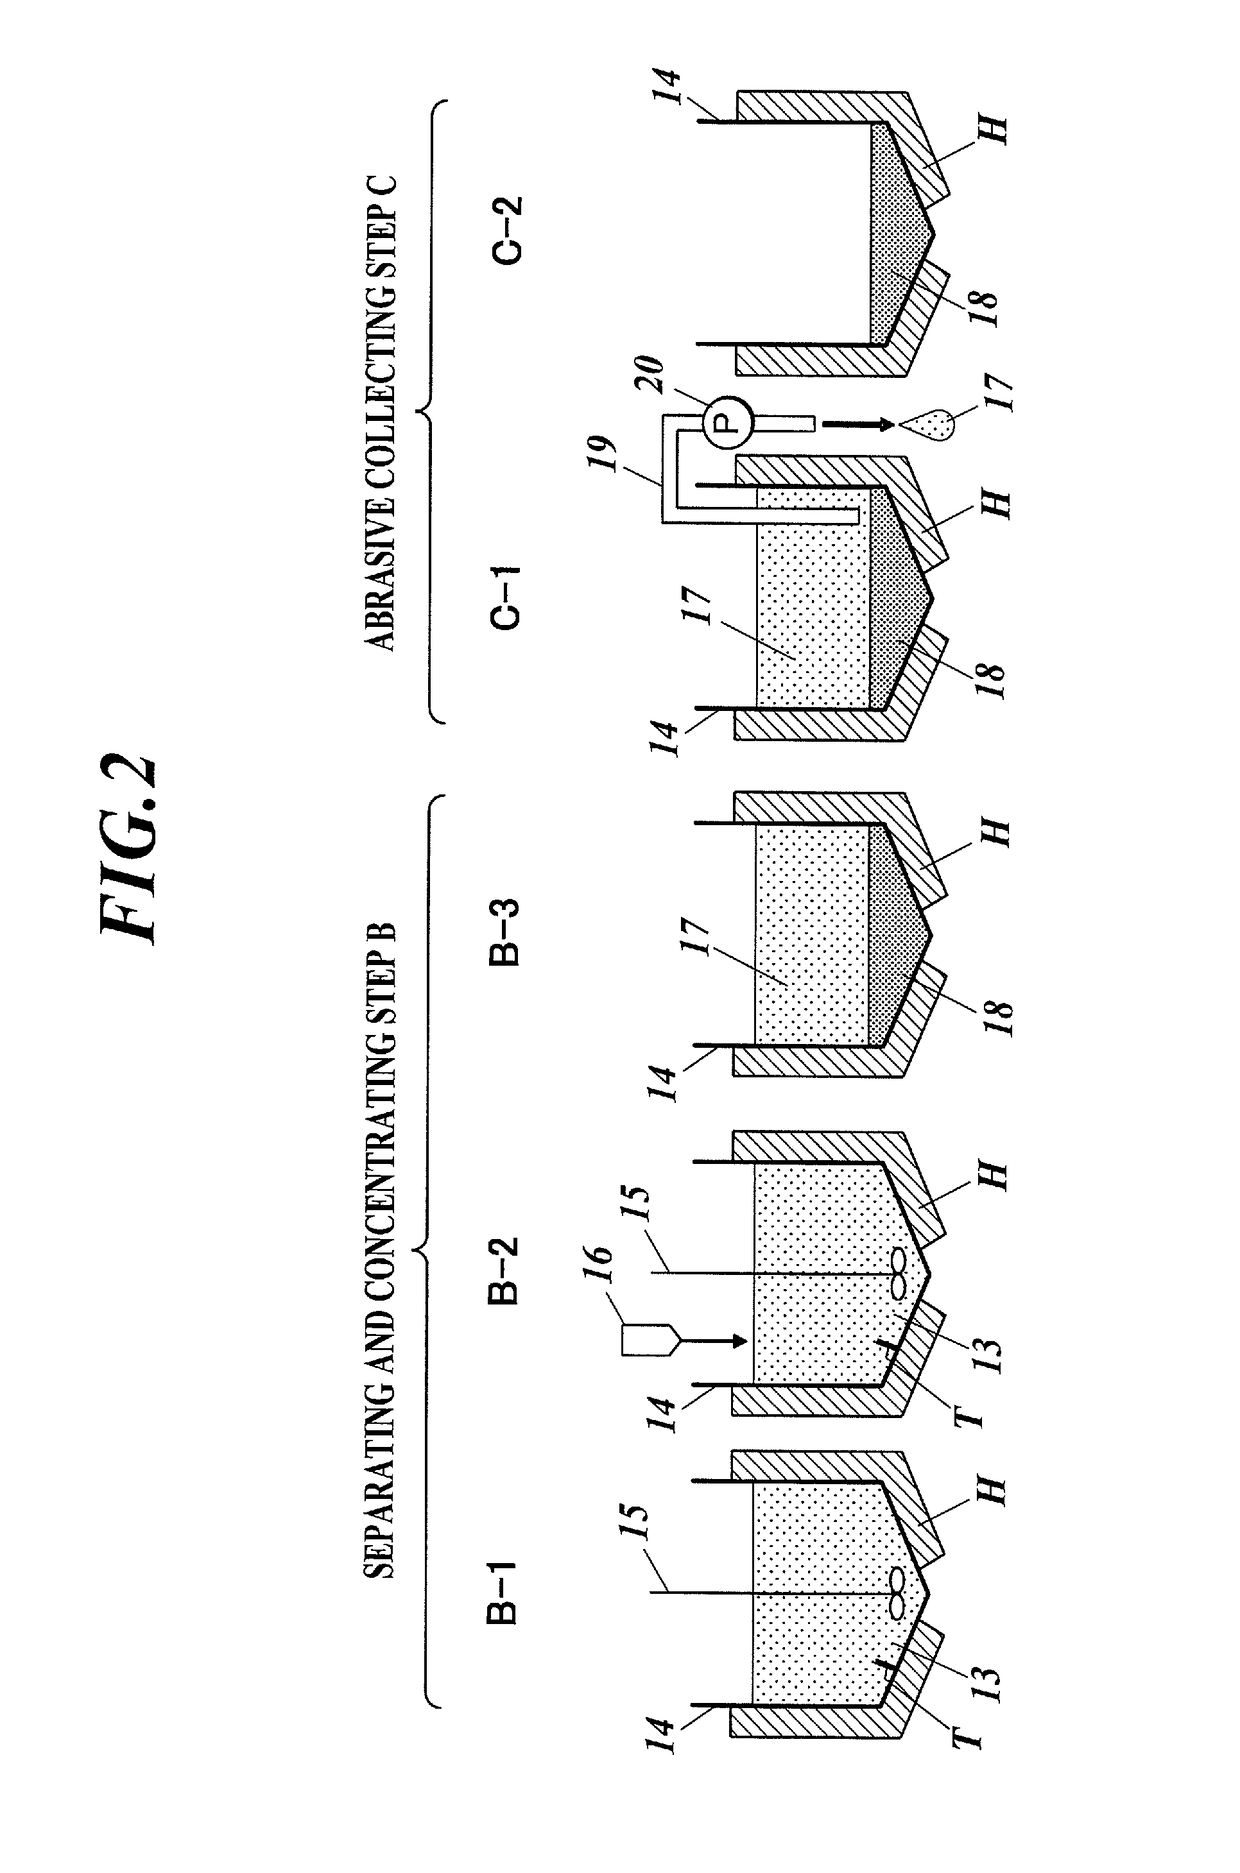 Method for separating polishing material and regenerated polishing material